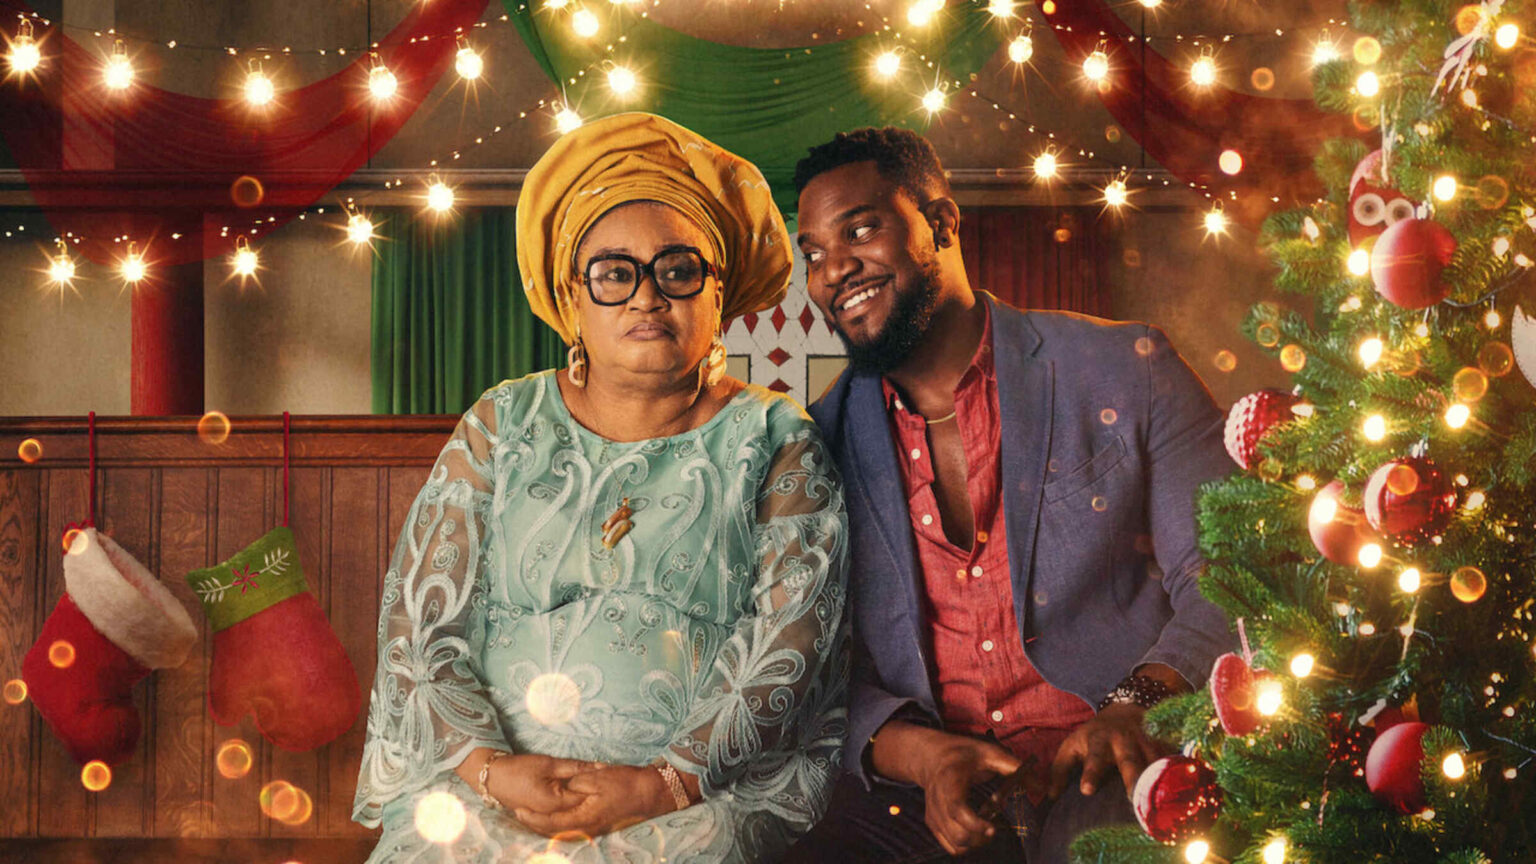 Get into the Nigerian spirit of Christmas and watch Netflix's 'A Naija Christmas' on December 16th! Will one mother's wish finally come true?